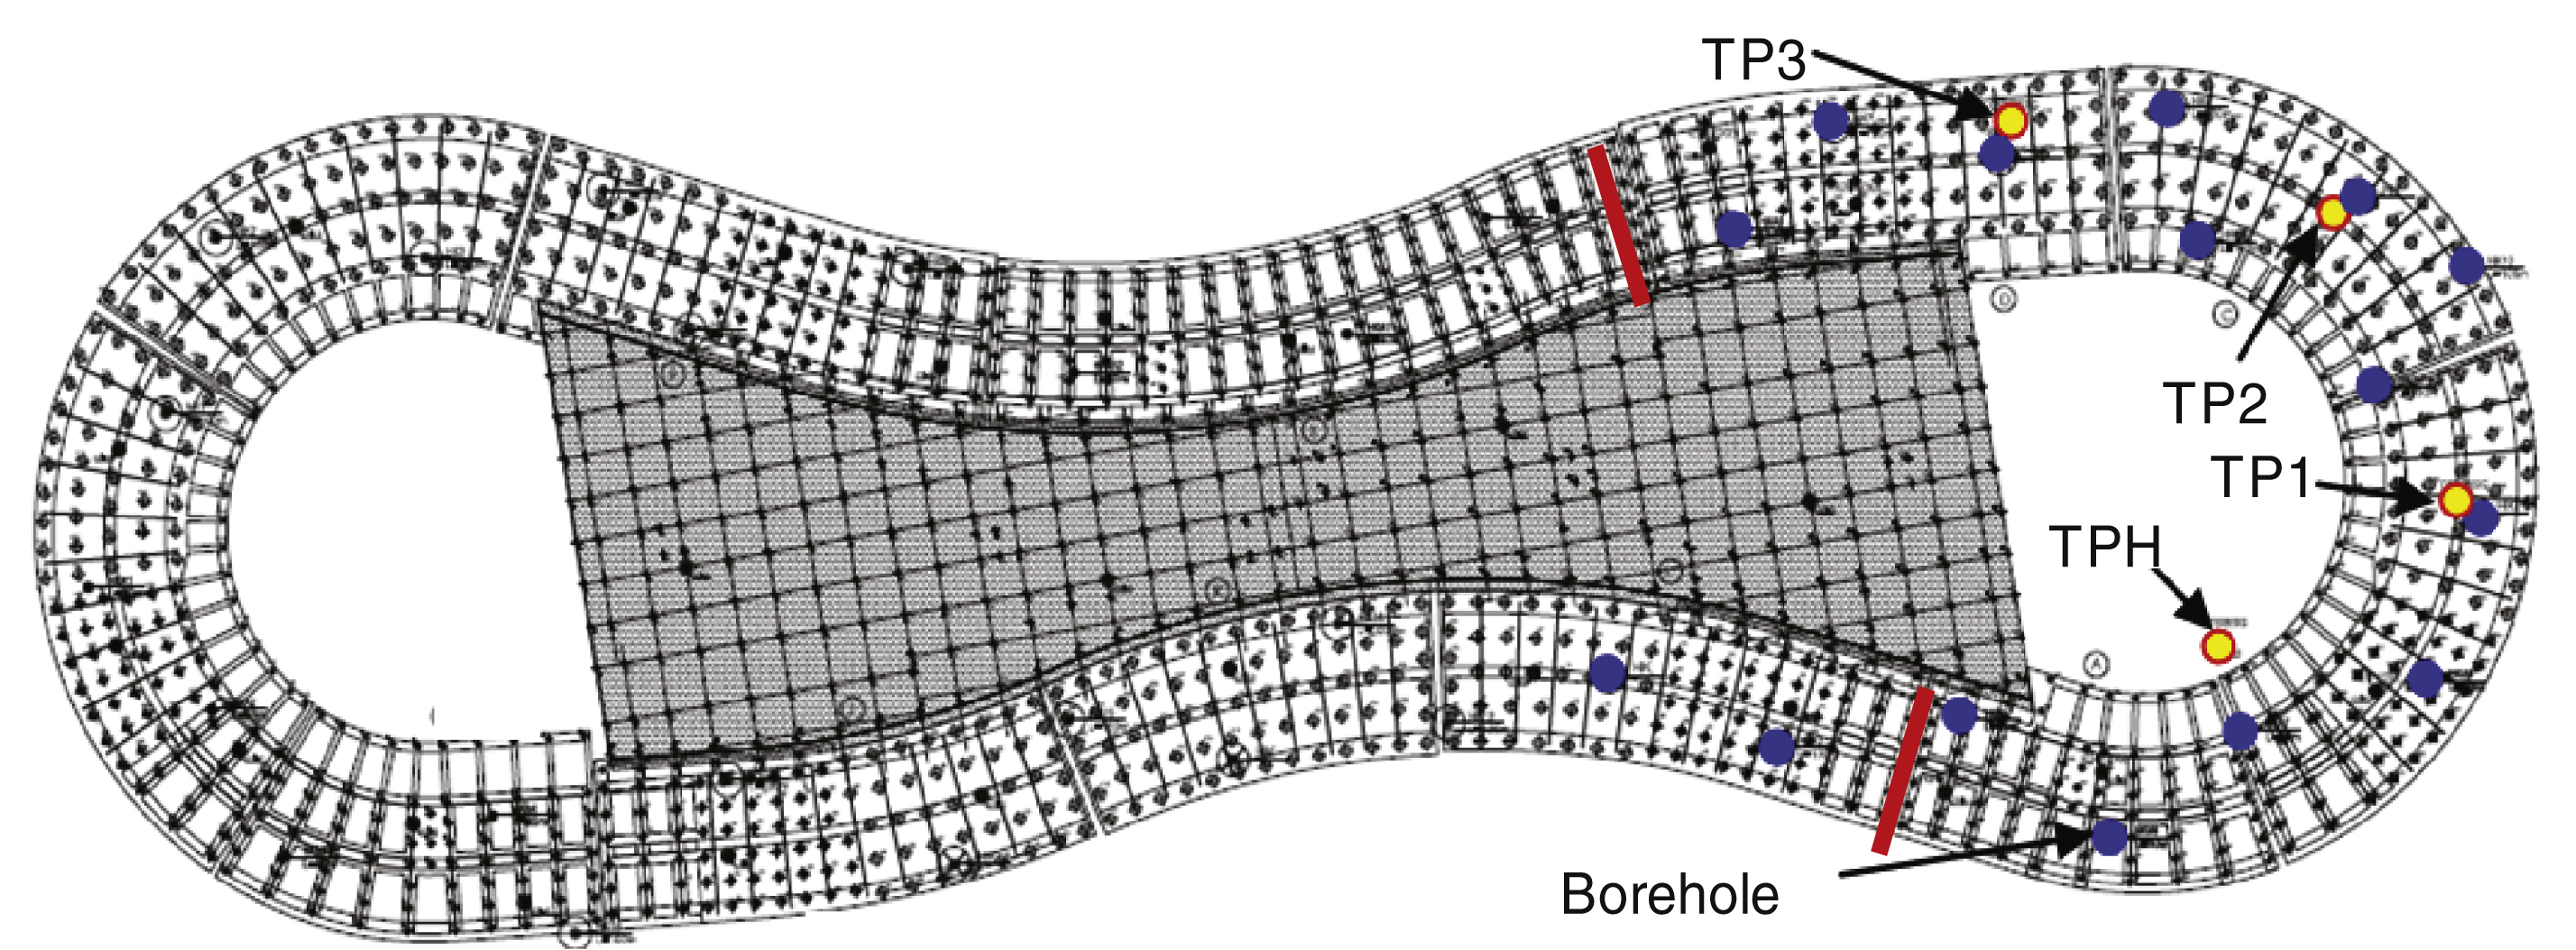 Layout of test piles and Boreholes in phase 1.